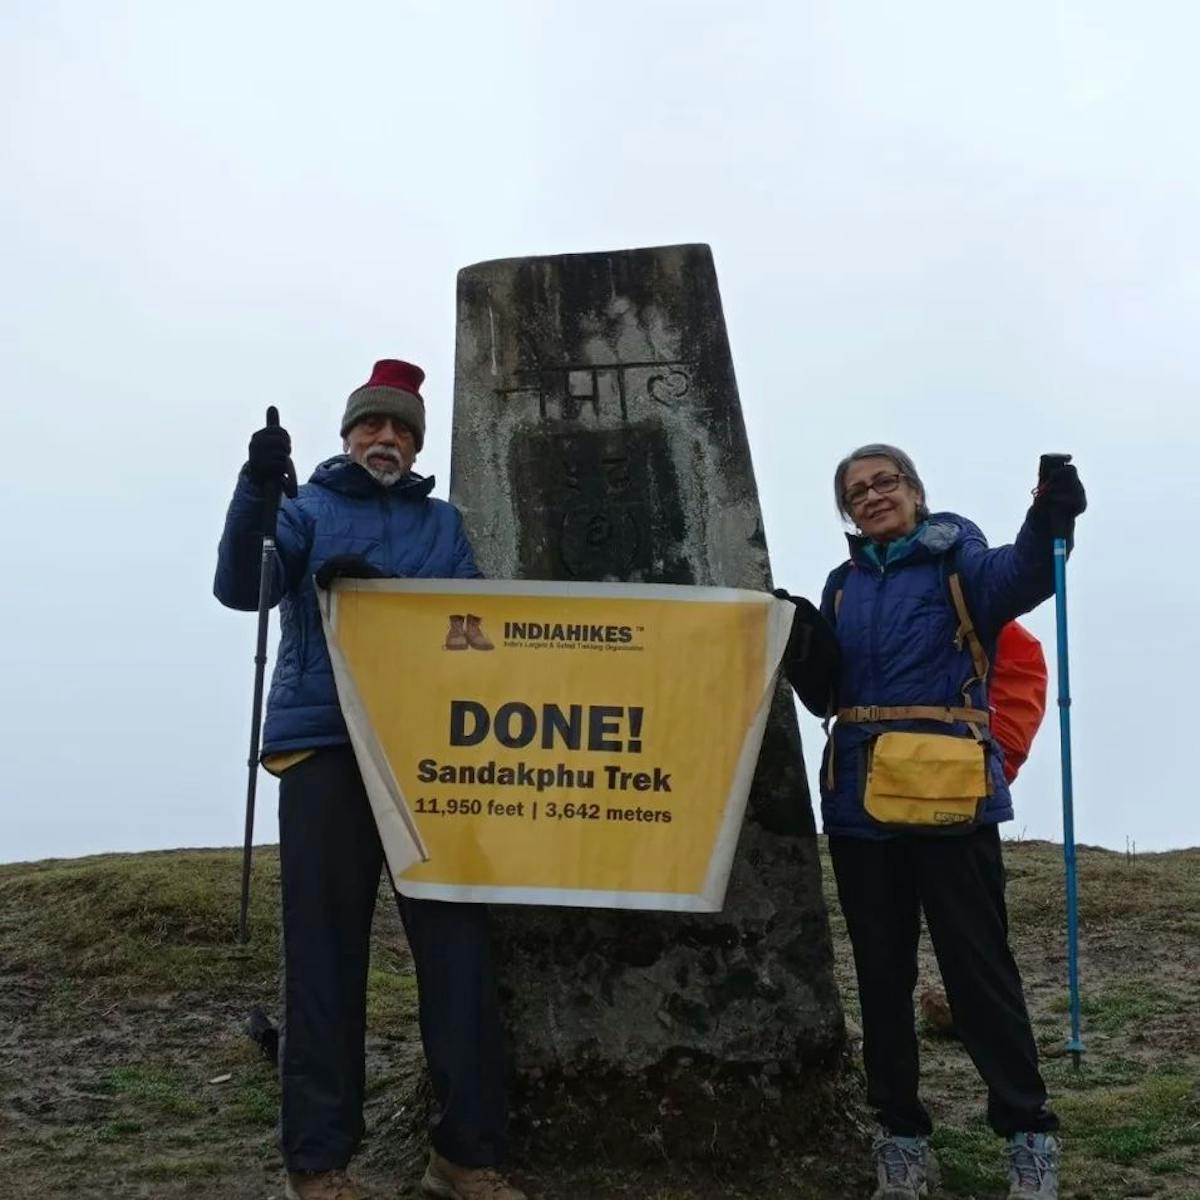 Mr. and Mrs. Shenoy after completing the Sandakphu Trek in March 2022.